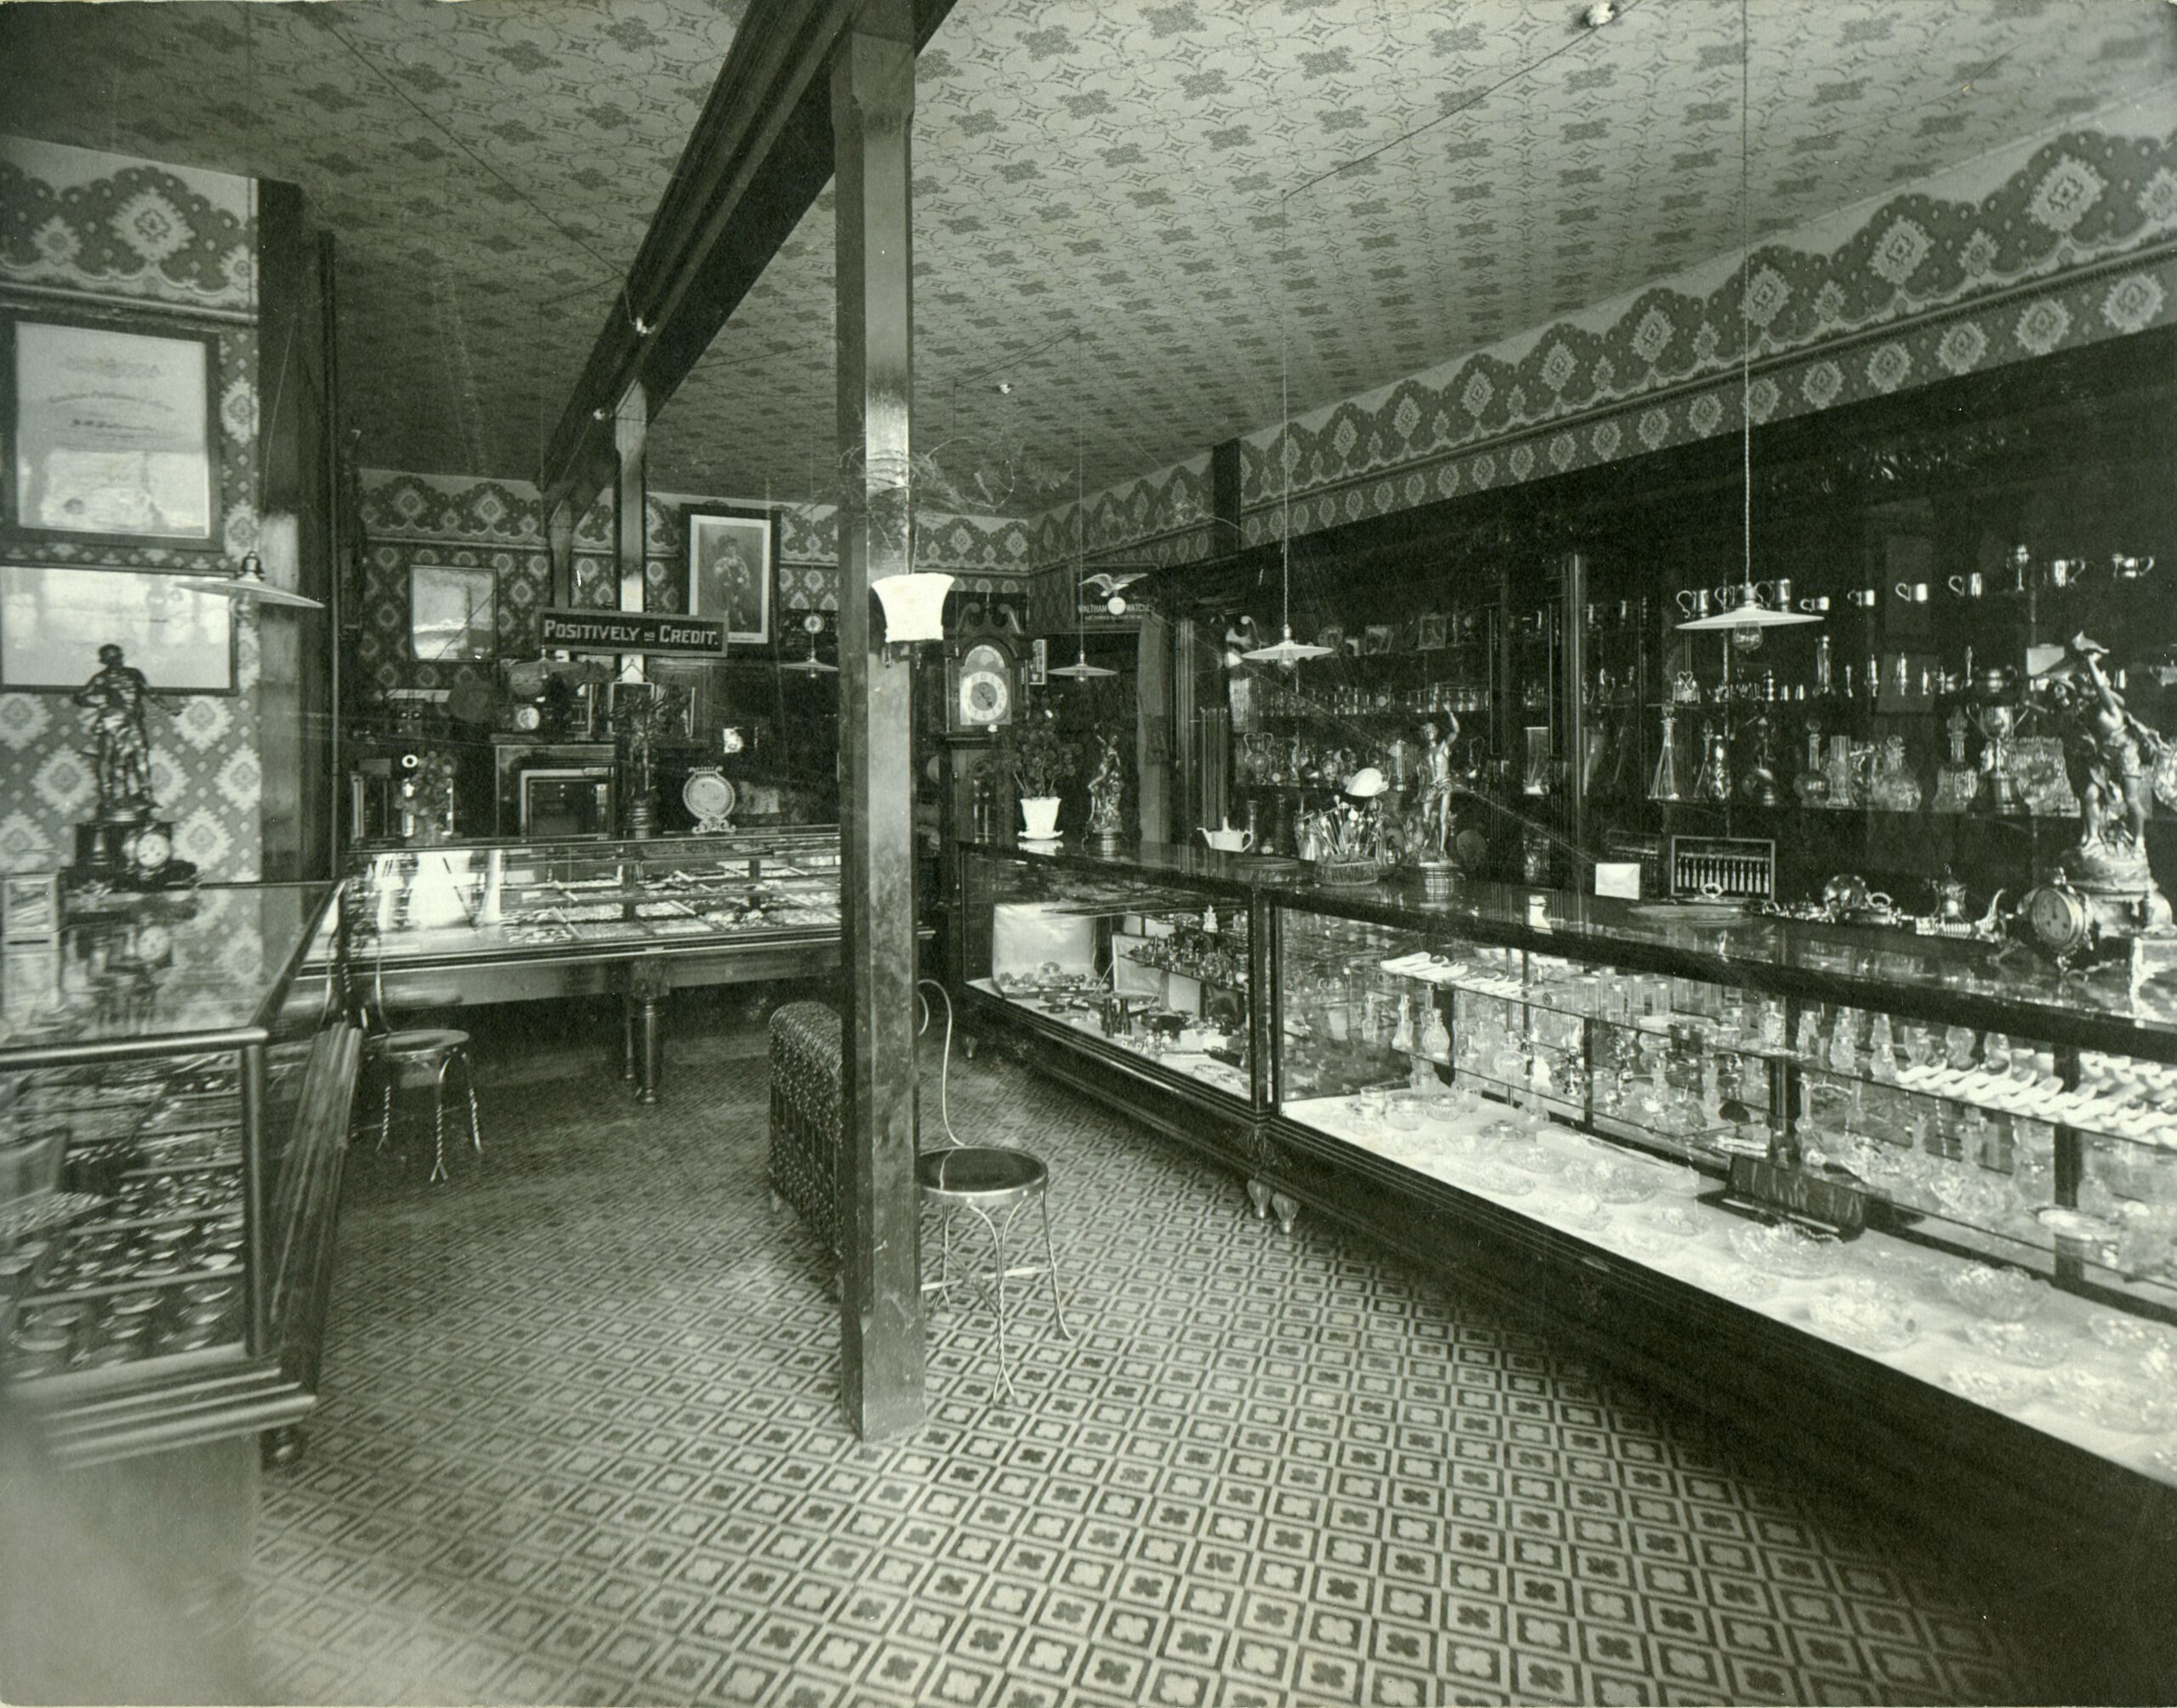 Inside lowly lit early 1900s shop with wraparound glass cases filled with jewelry